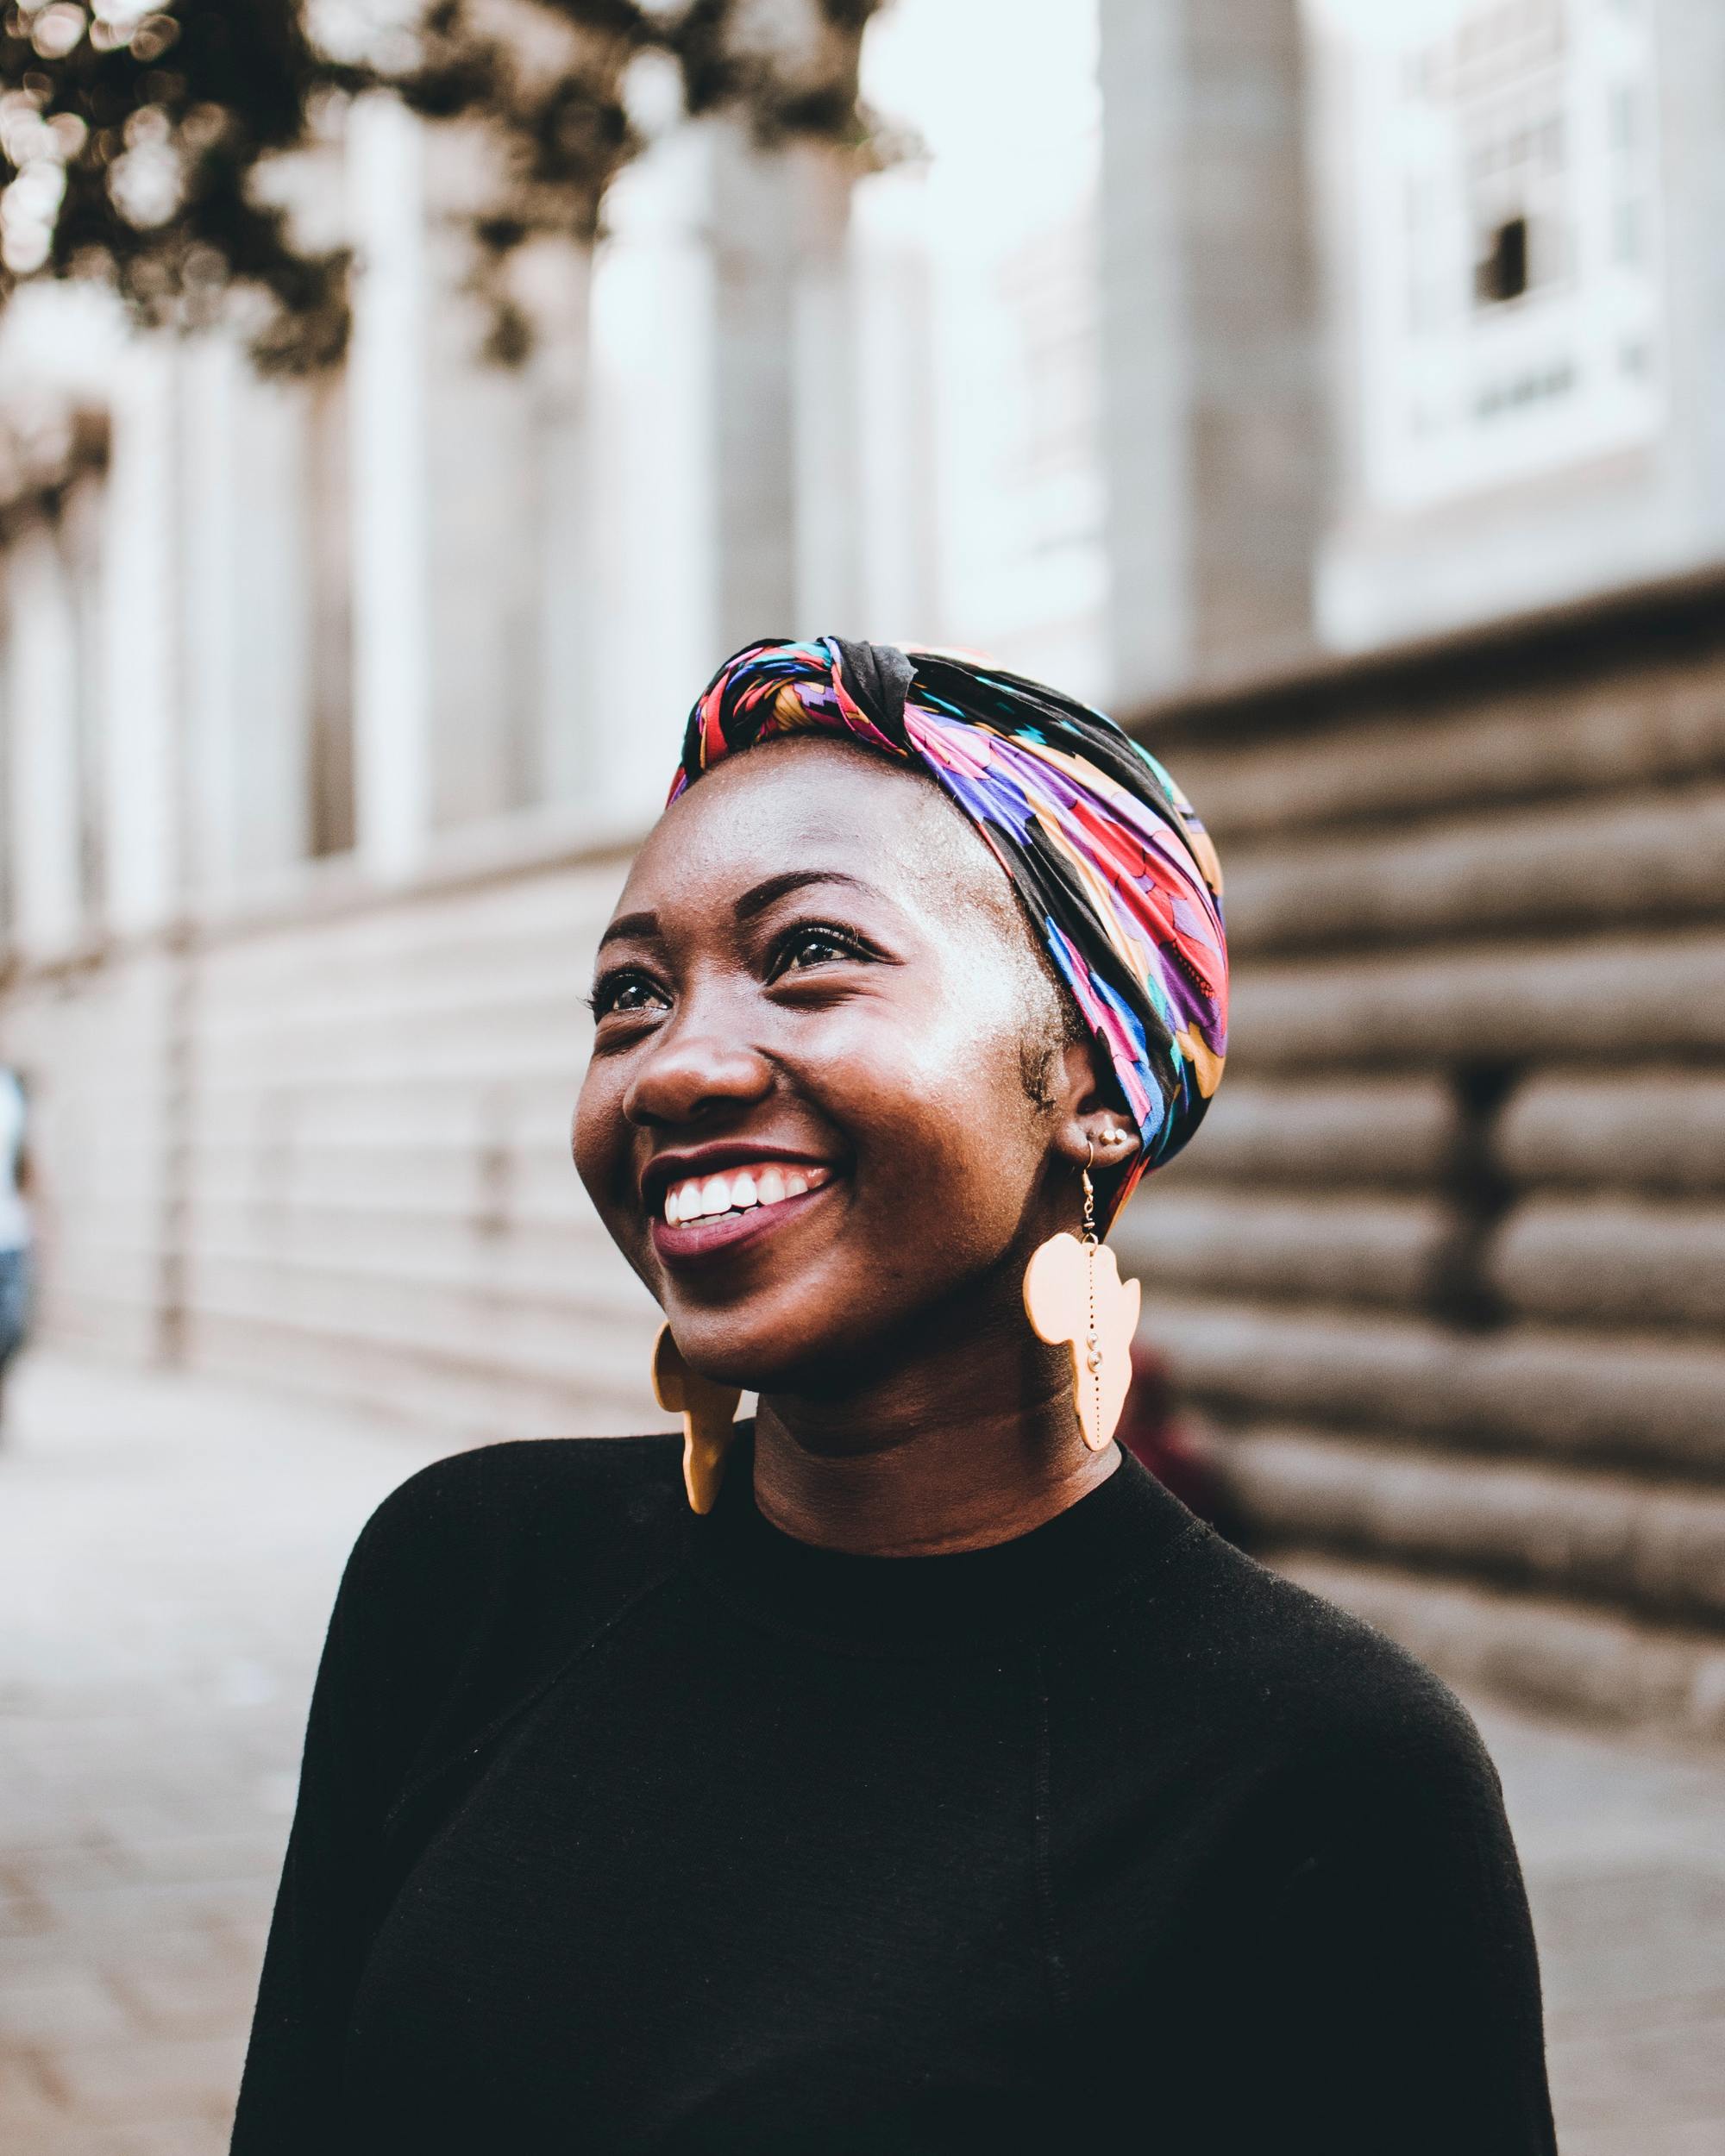 hair accessories: woman wearing a colourful headwrap with a small knot in the front